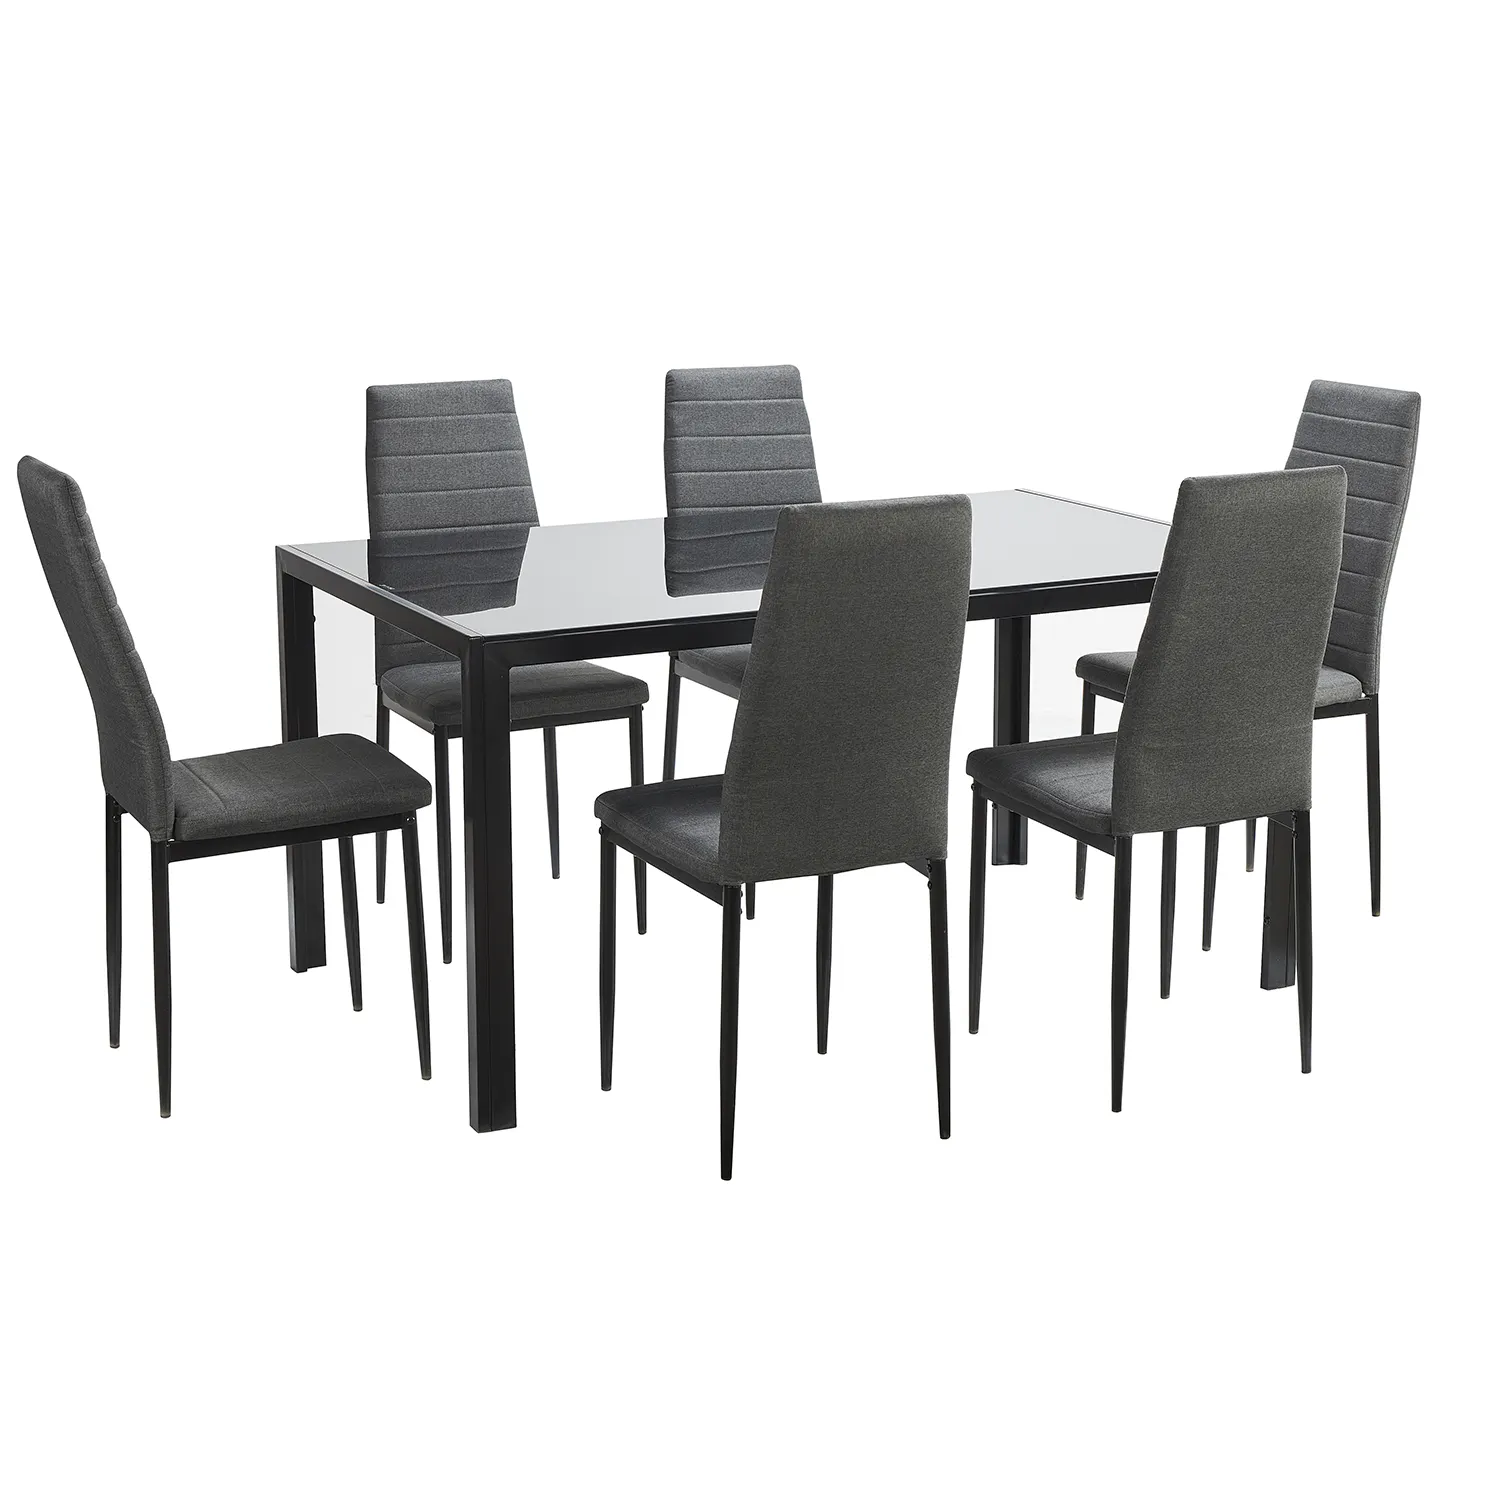 Modern nordic dining room furniture pu leather dining chair glass dining table set 6 chairs